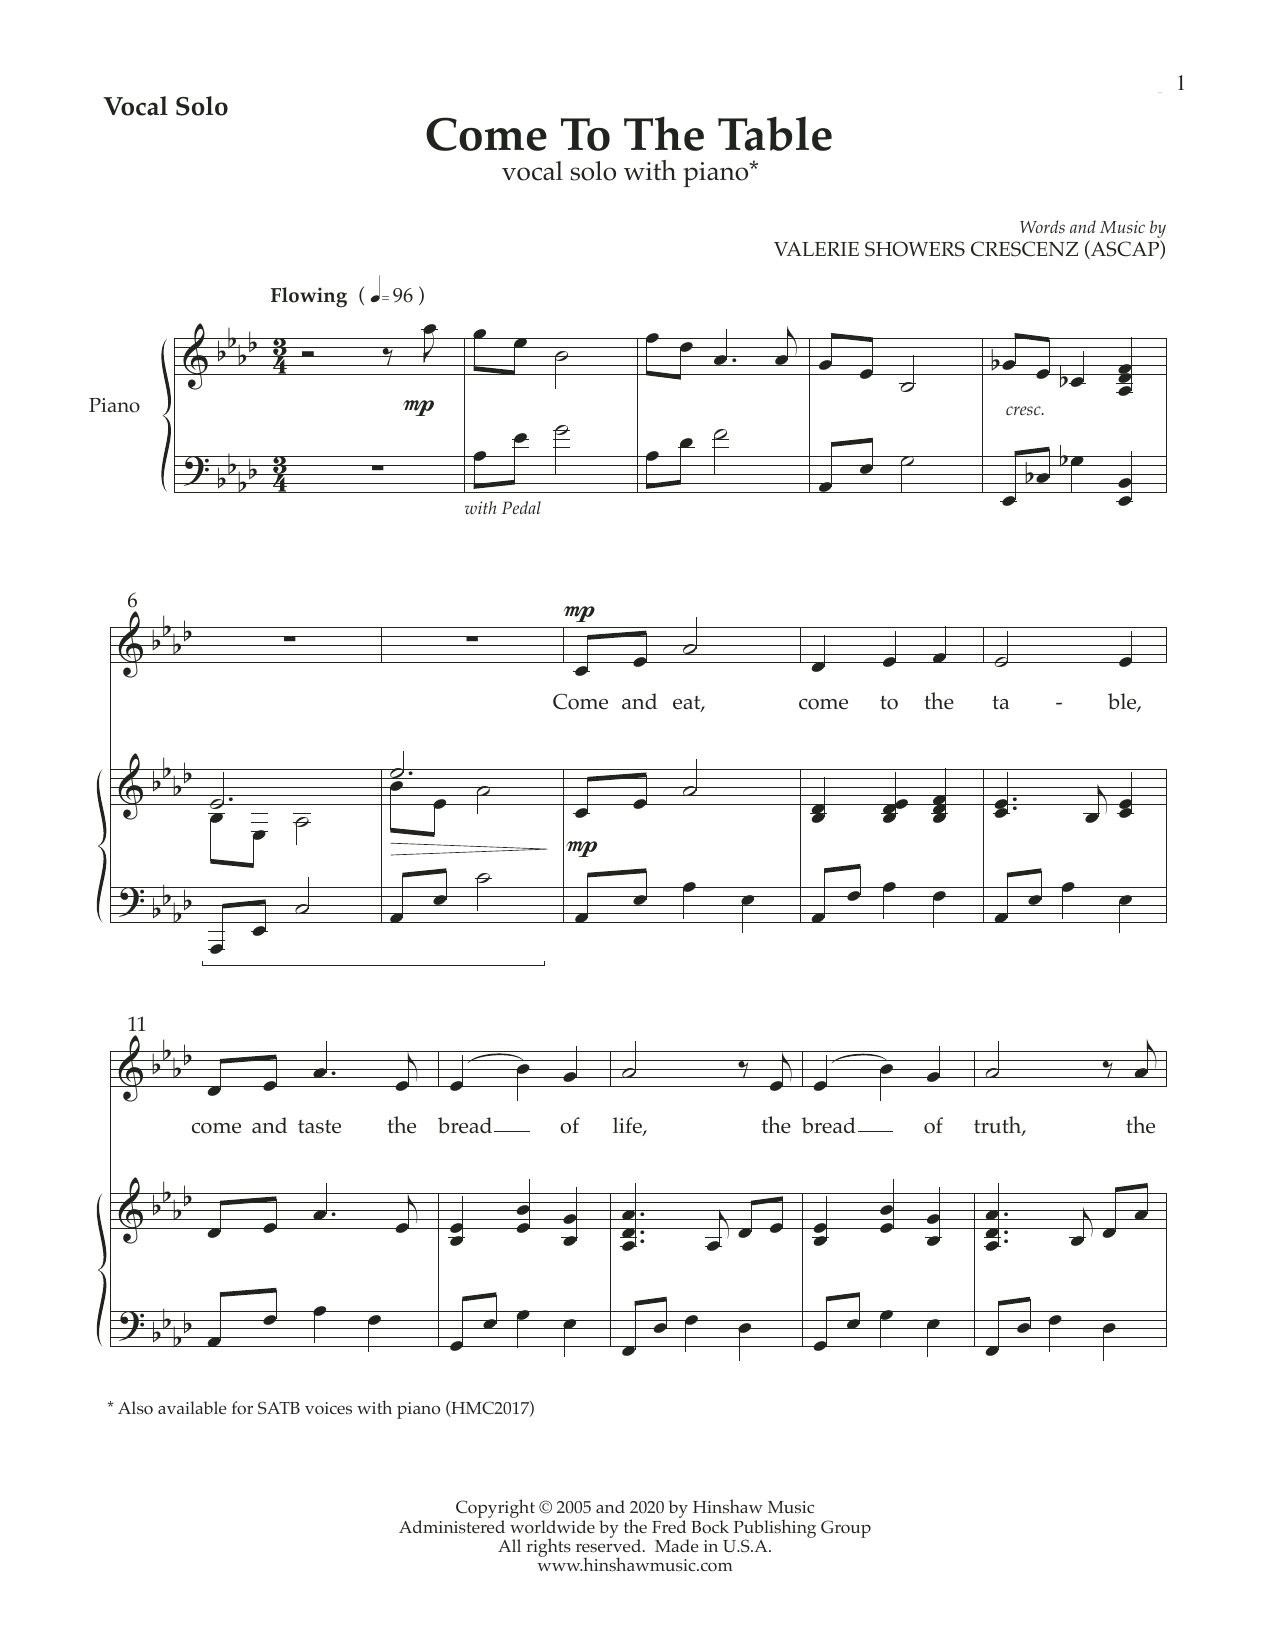 Download Valerie Showers Crescenz Come to the Table Sheet Music